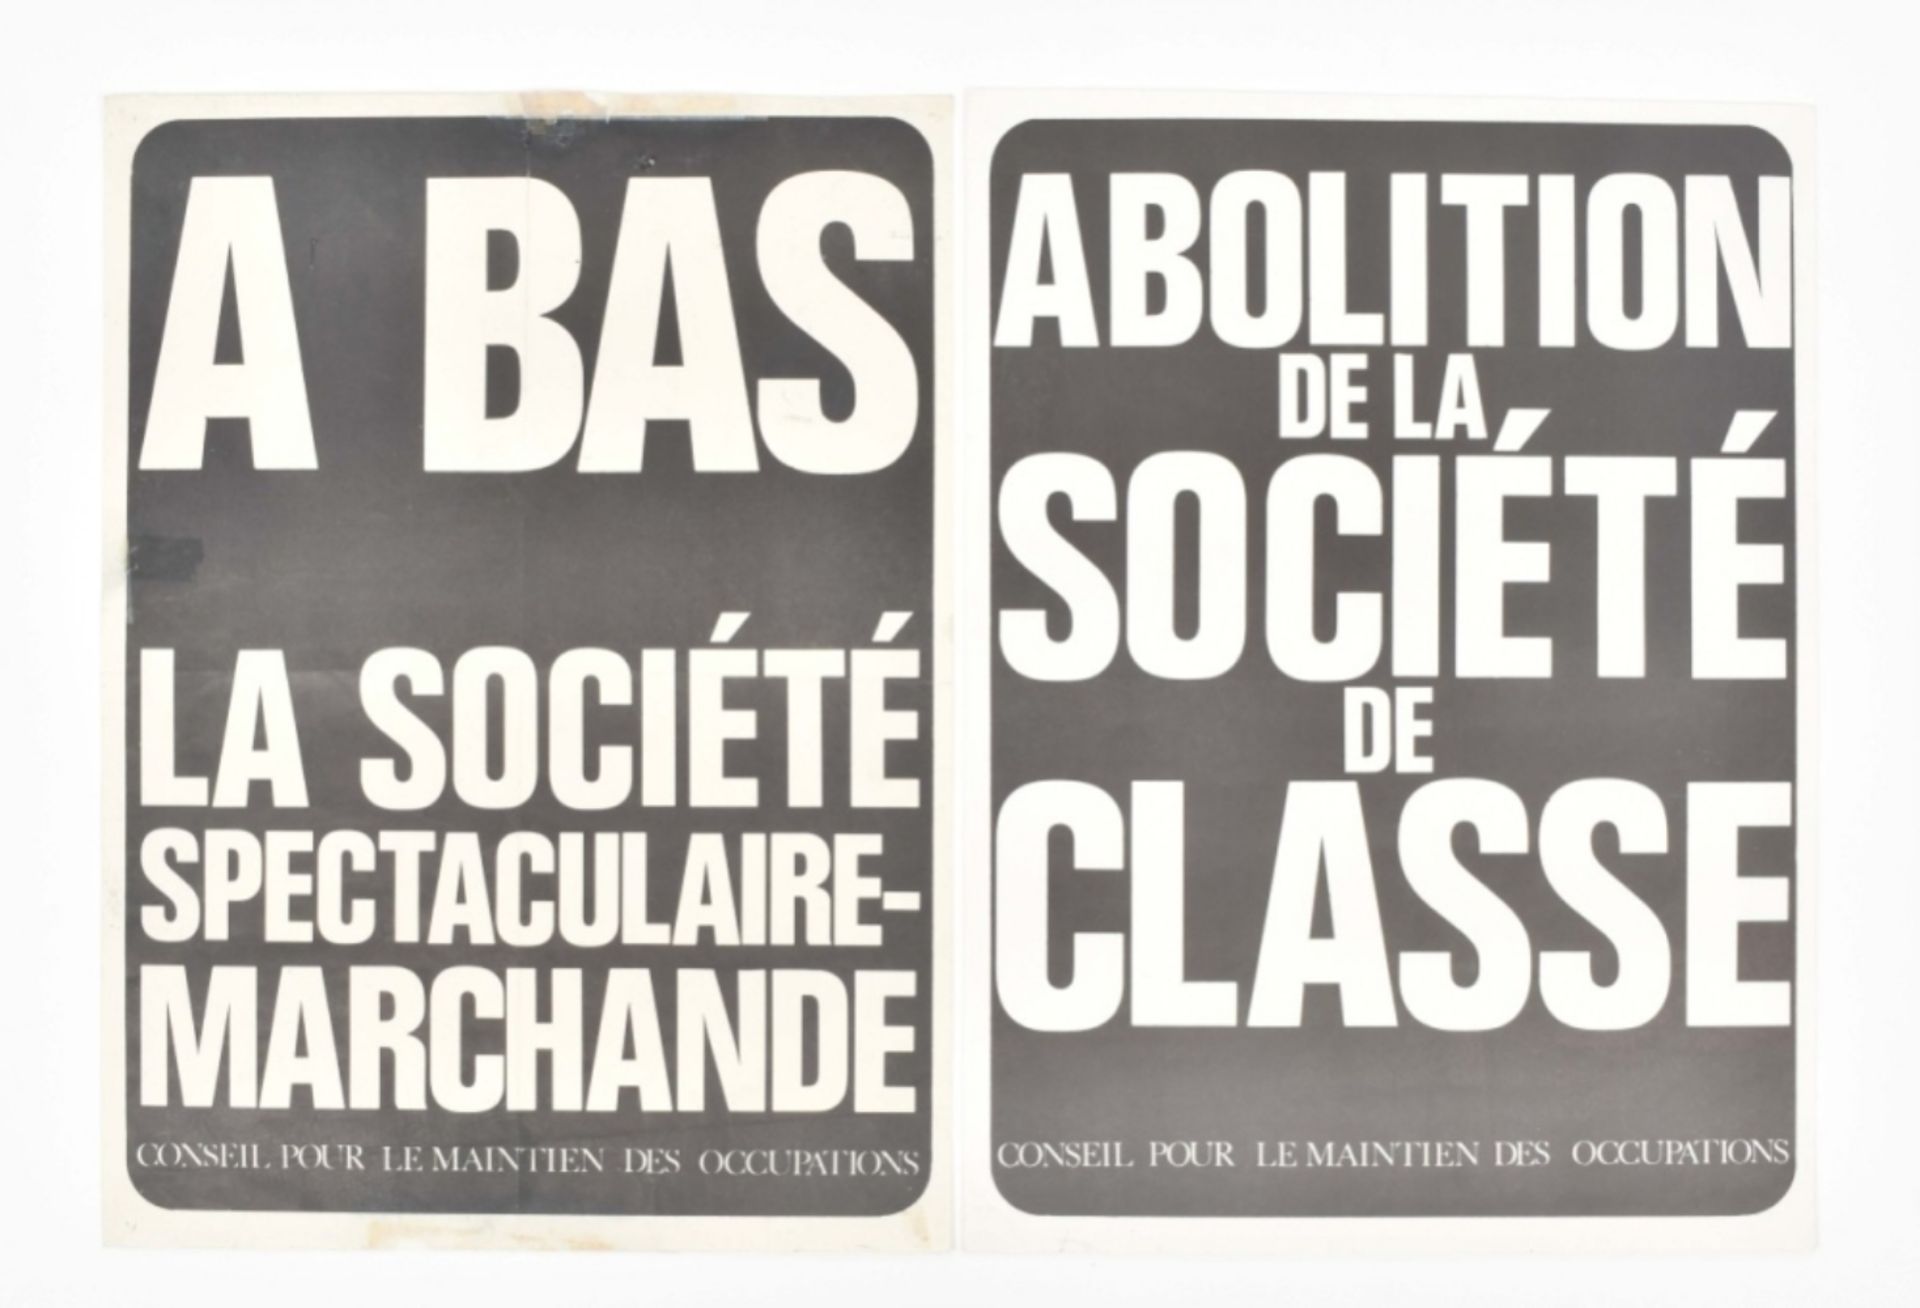 [Situationists] Posters by the Conseil pour le Maintien des Occupations